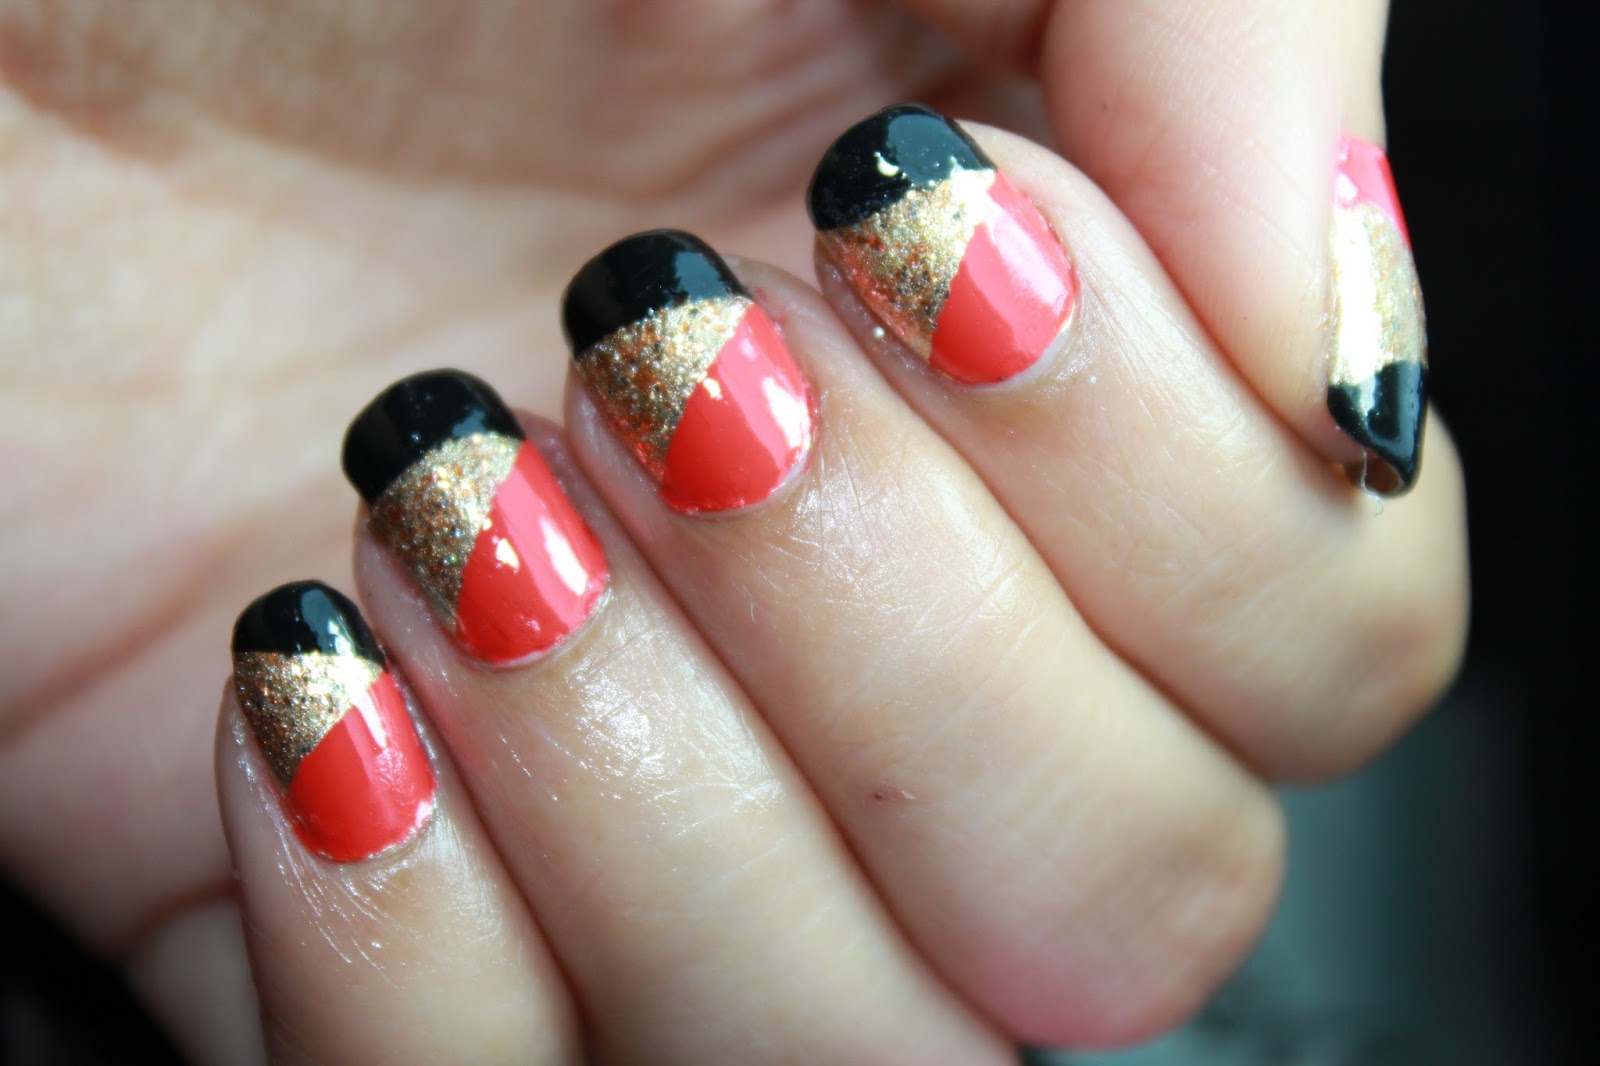 2. Different Nail Art Designs - wide 7